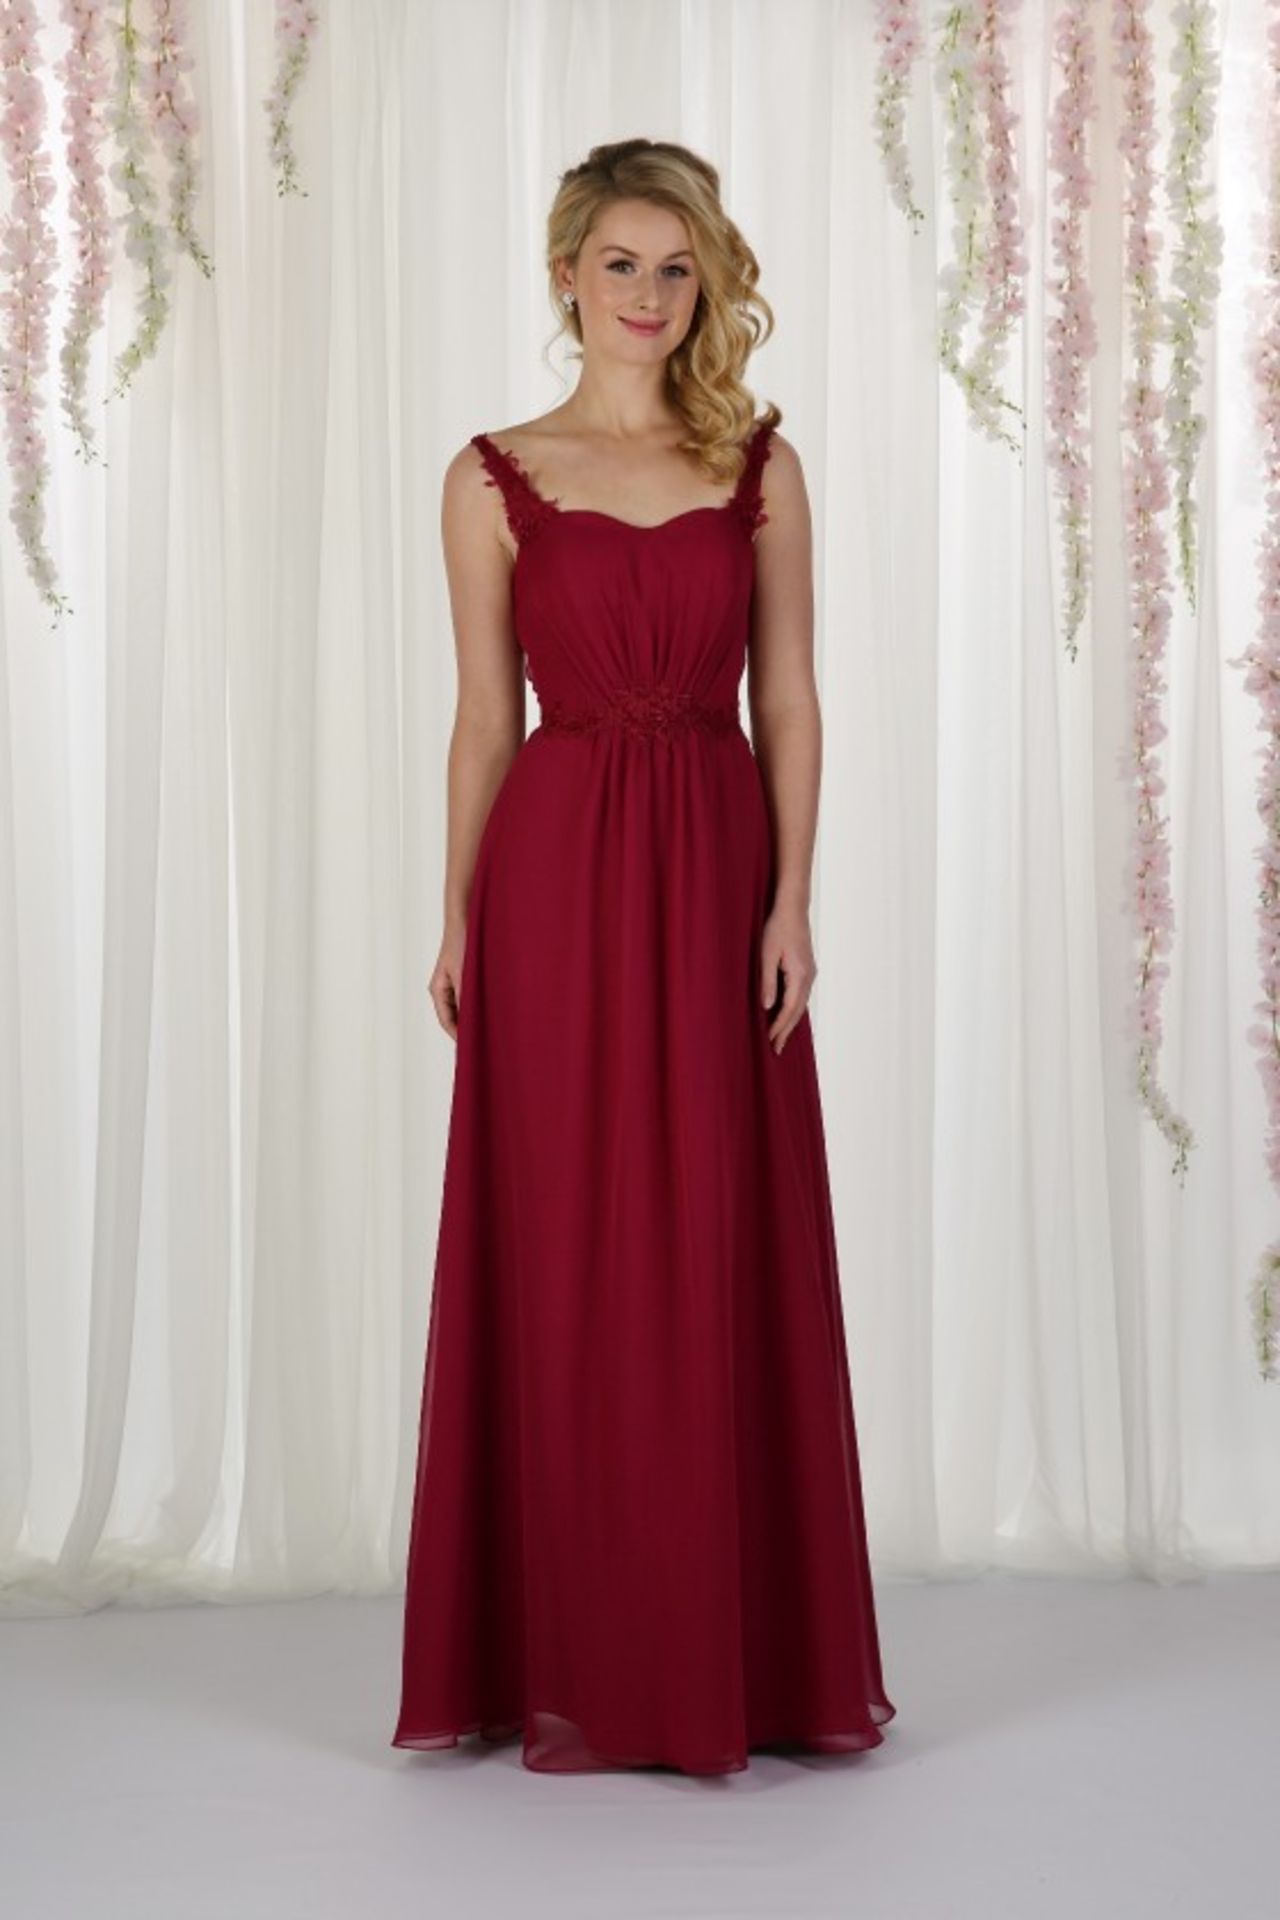 Bridesmaid Or Prom Dresses From Richard Designs Mixed Sizes and Colours. 10 Dresses - Image 9 of 9